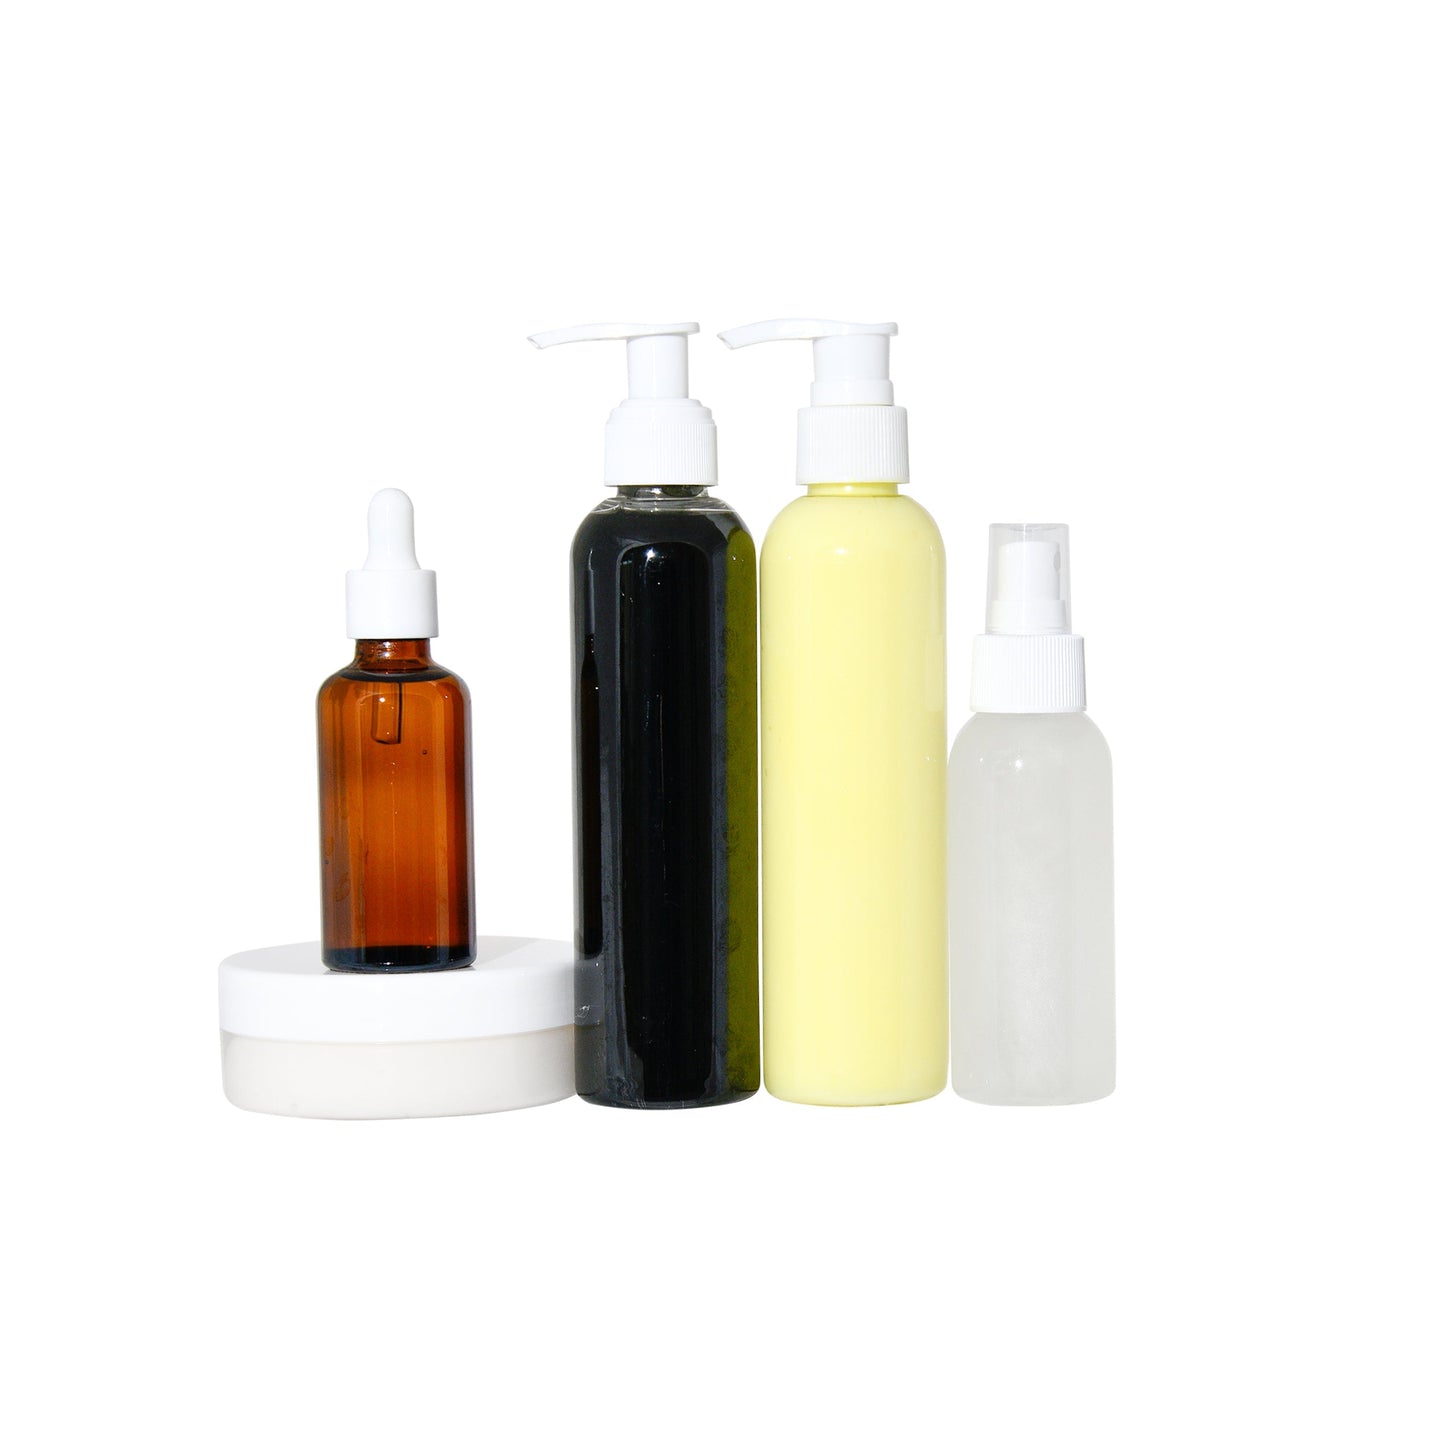 Shea butter and avocado oil haircare range - for dry damaged hair